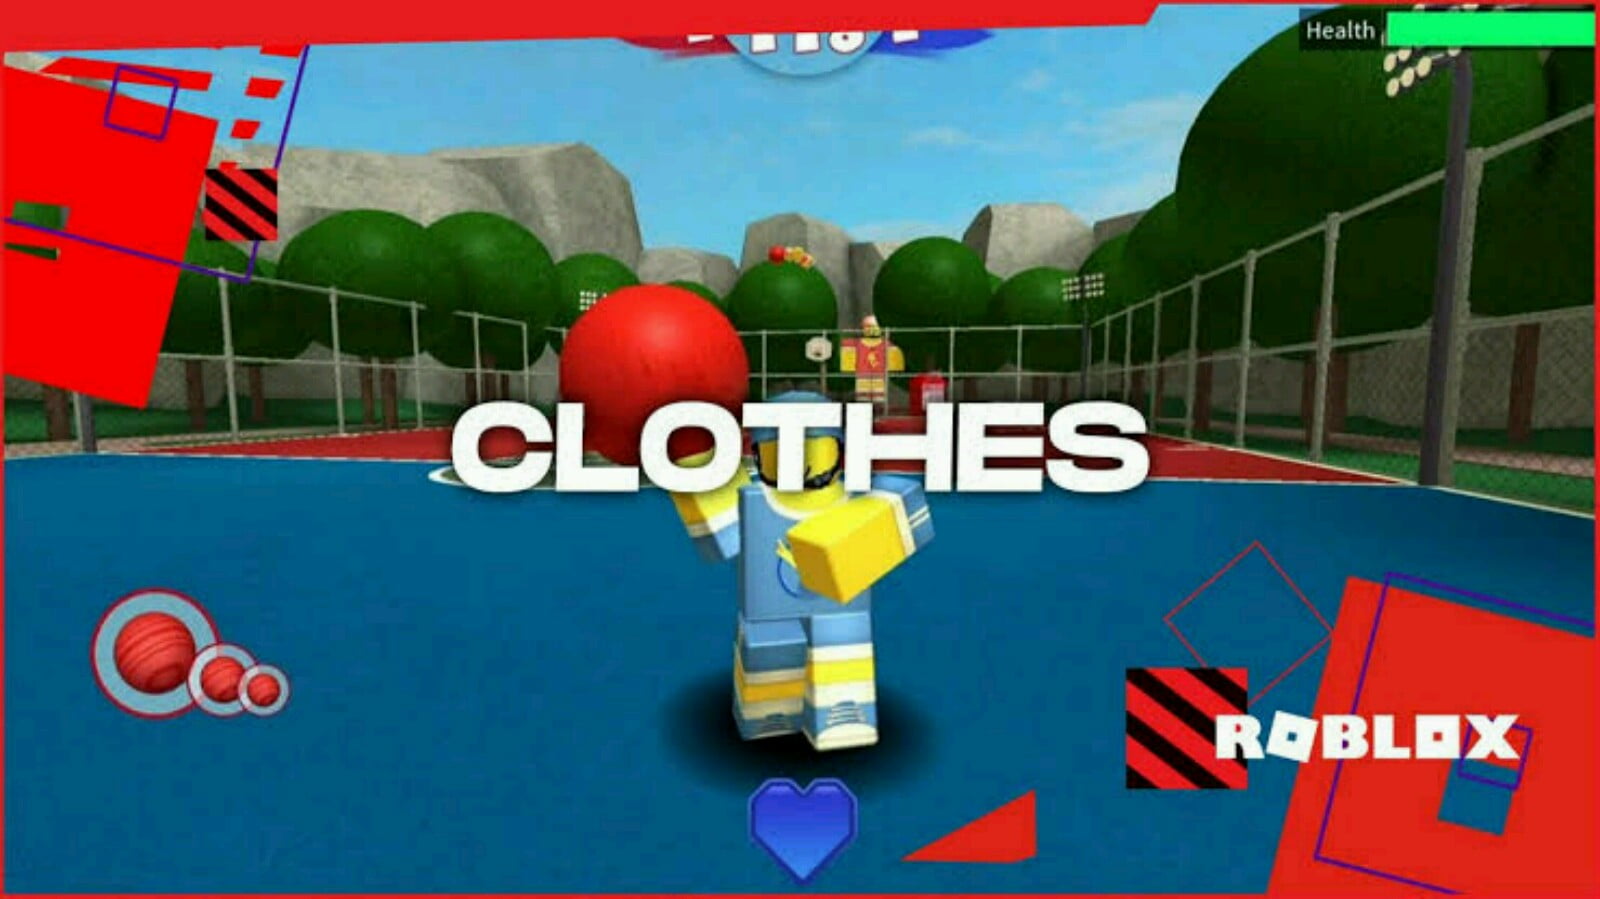 How To Make Clothes On Roblox 100 Working - how to test clothes on roblox before uploading